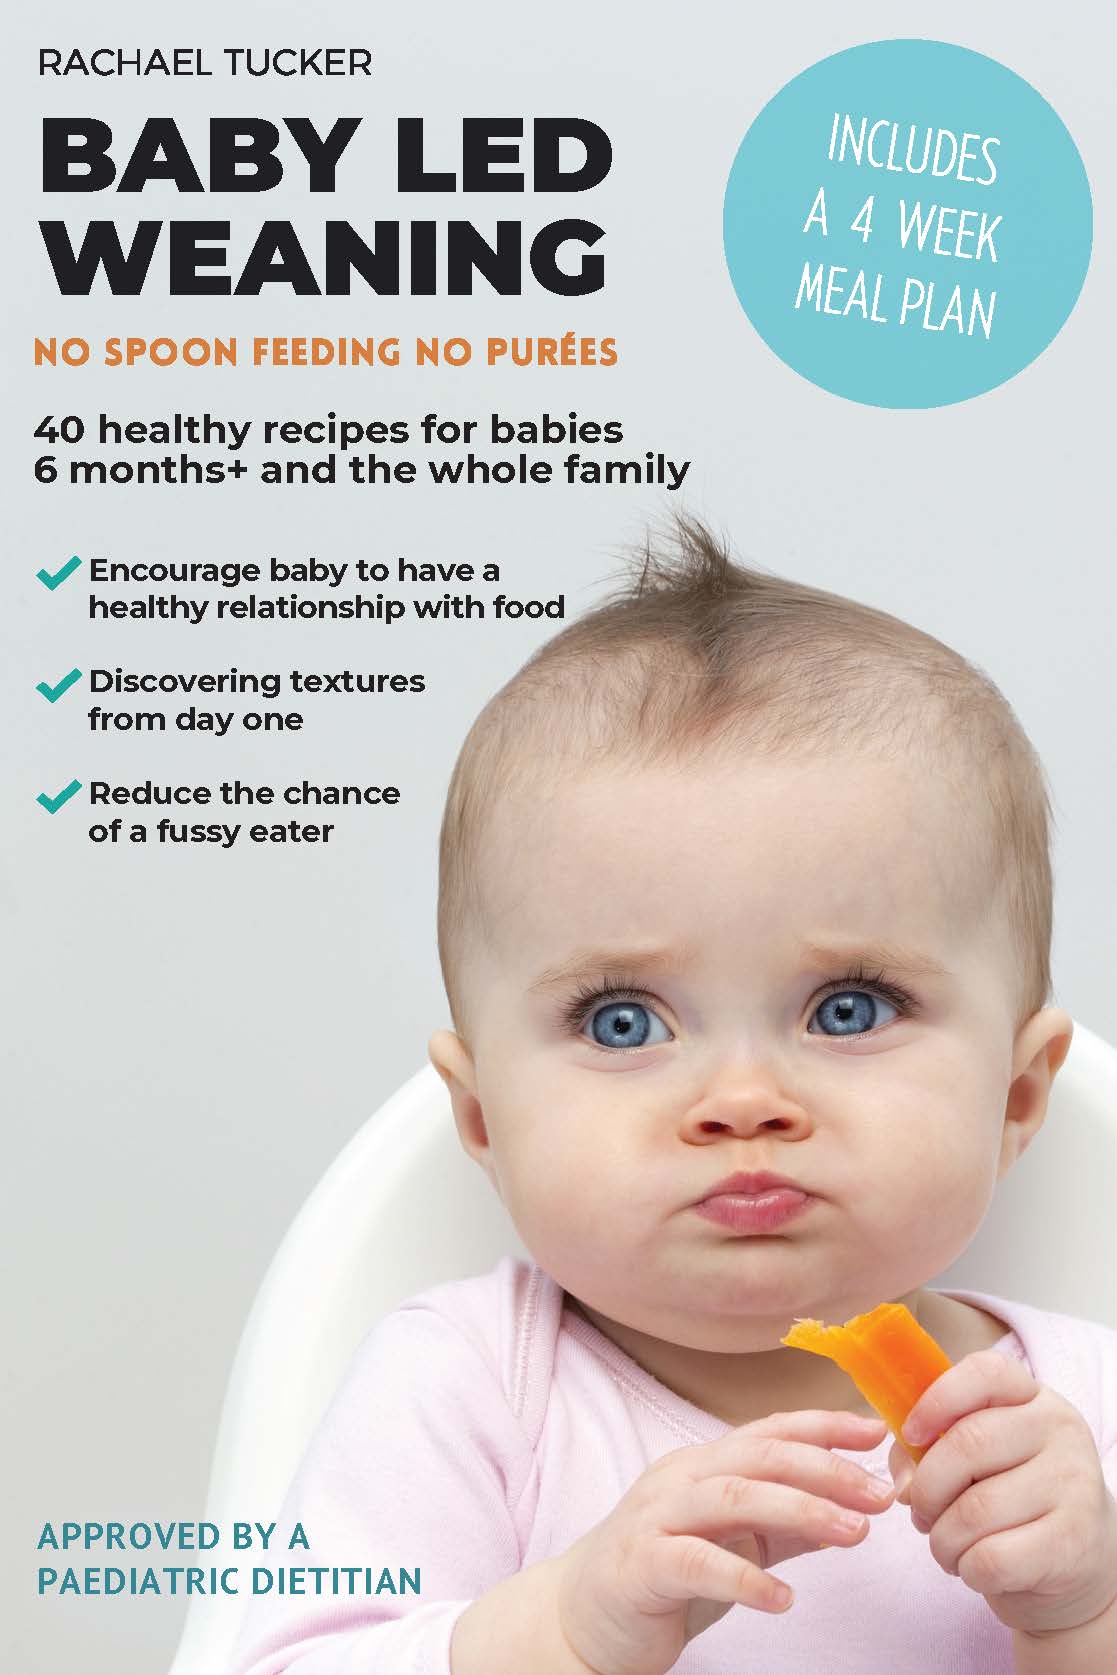 What You Should Know About Baby-Led Weaning